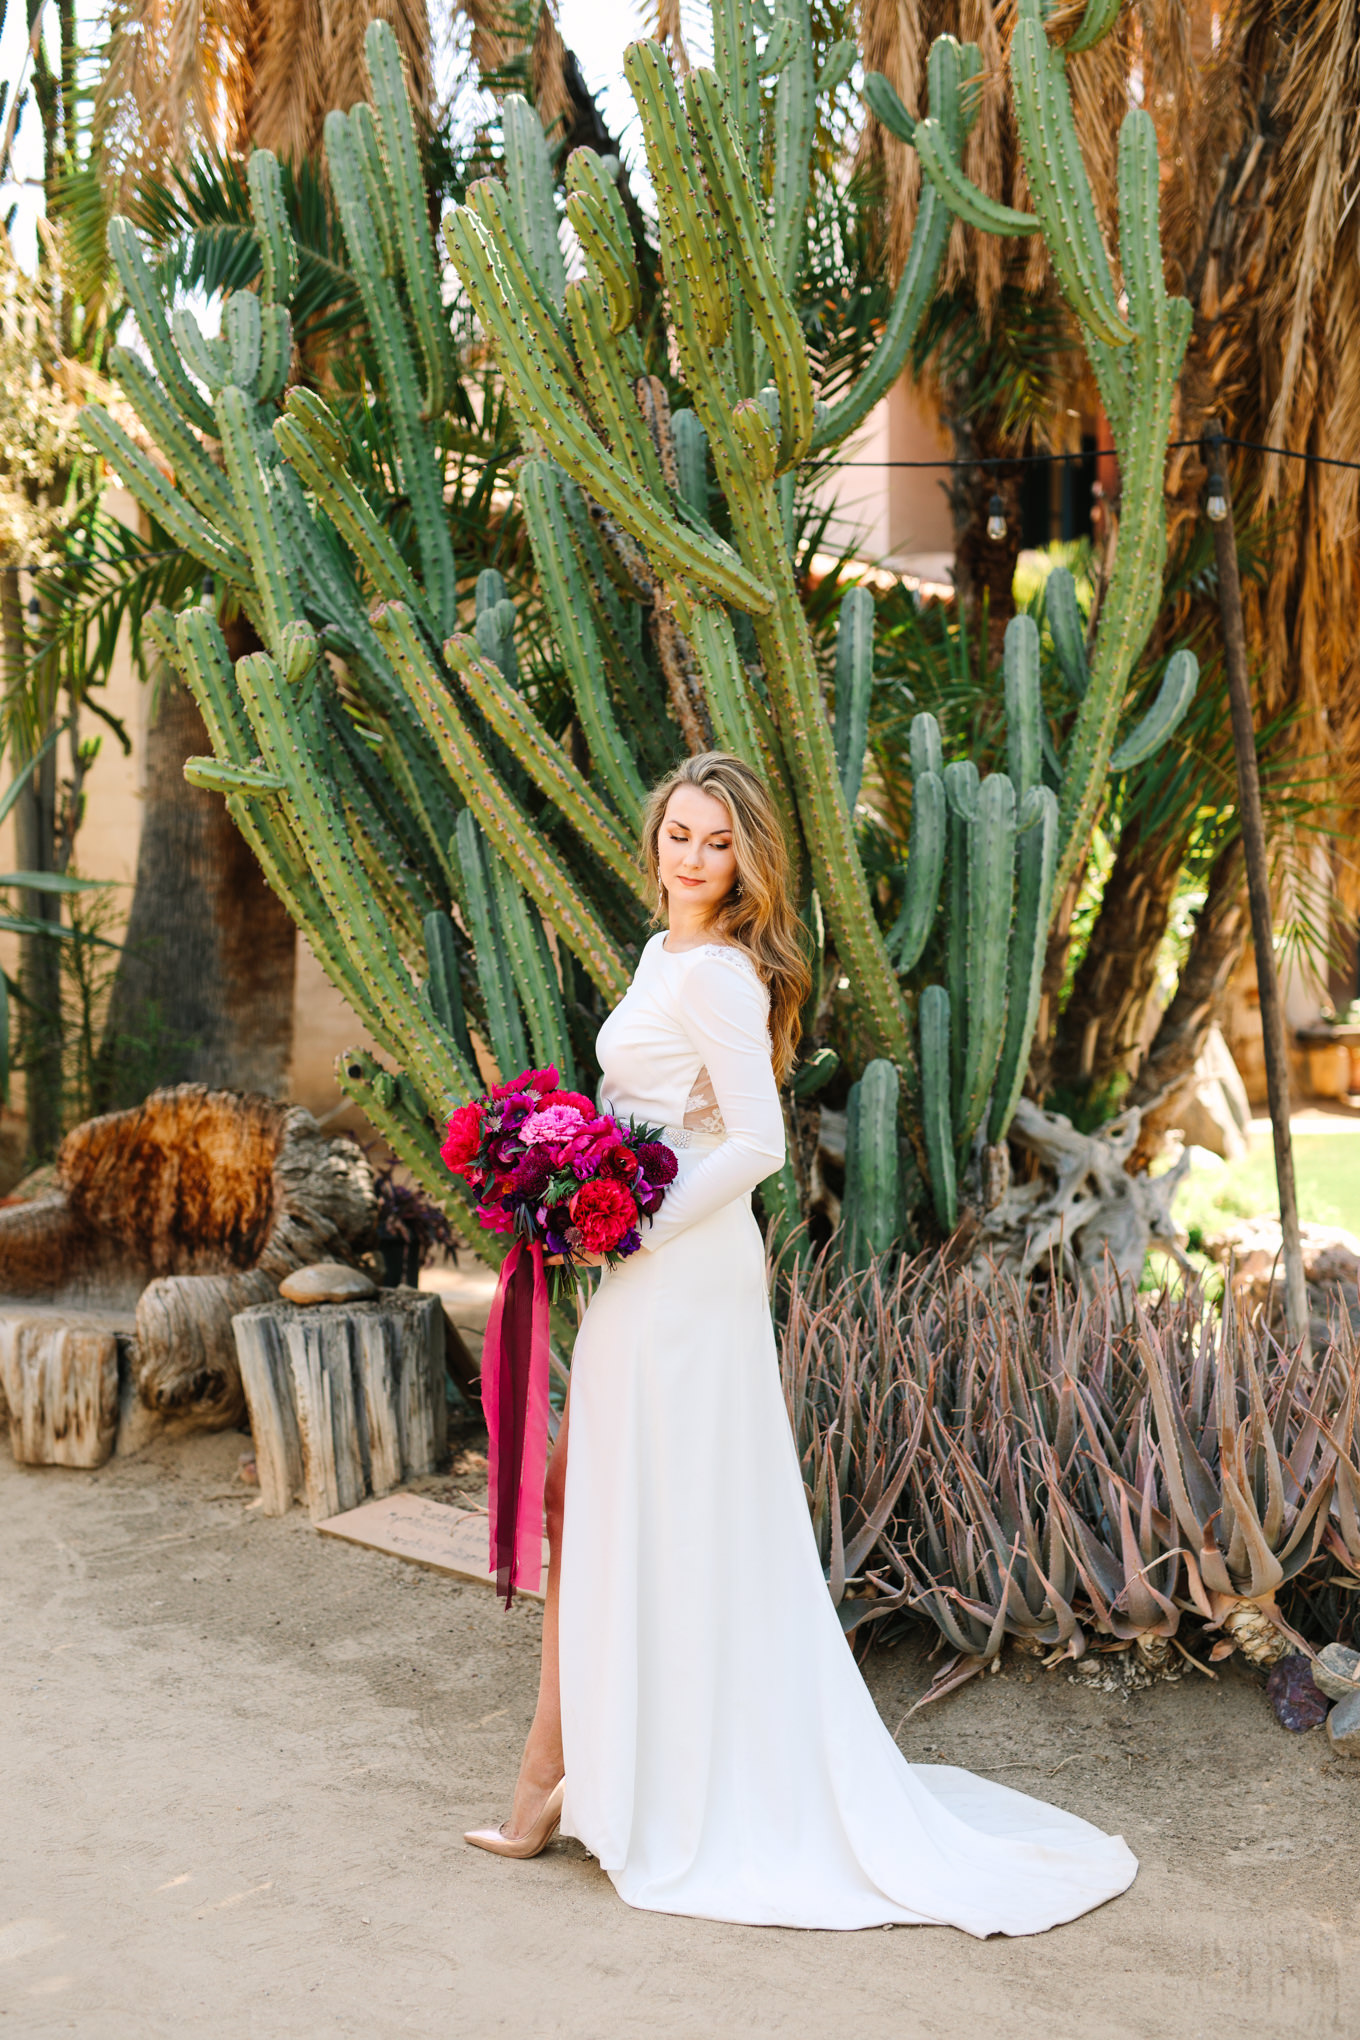 Bride in long sleeve dress with cacti | Colorful jewel tone Palm Springs elopement | Fresh and colorful photography for fun-loving couples in Southern California | #colorfulelopement #palmspringselopement #elopementphotography #palmspringswedding Source: Mary Costa Photography | Los Angeles